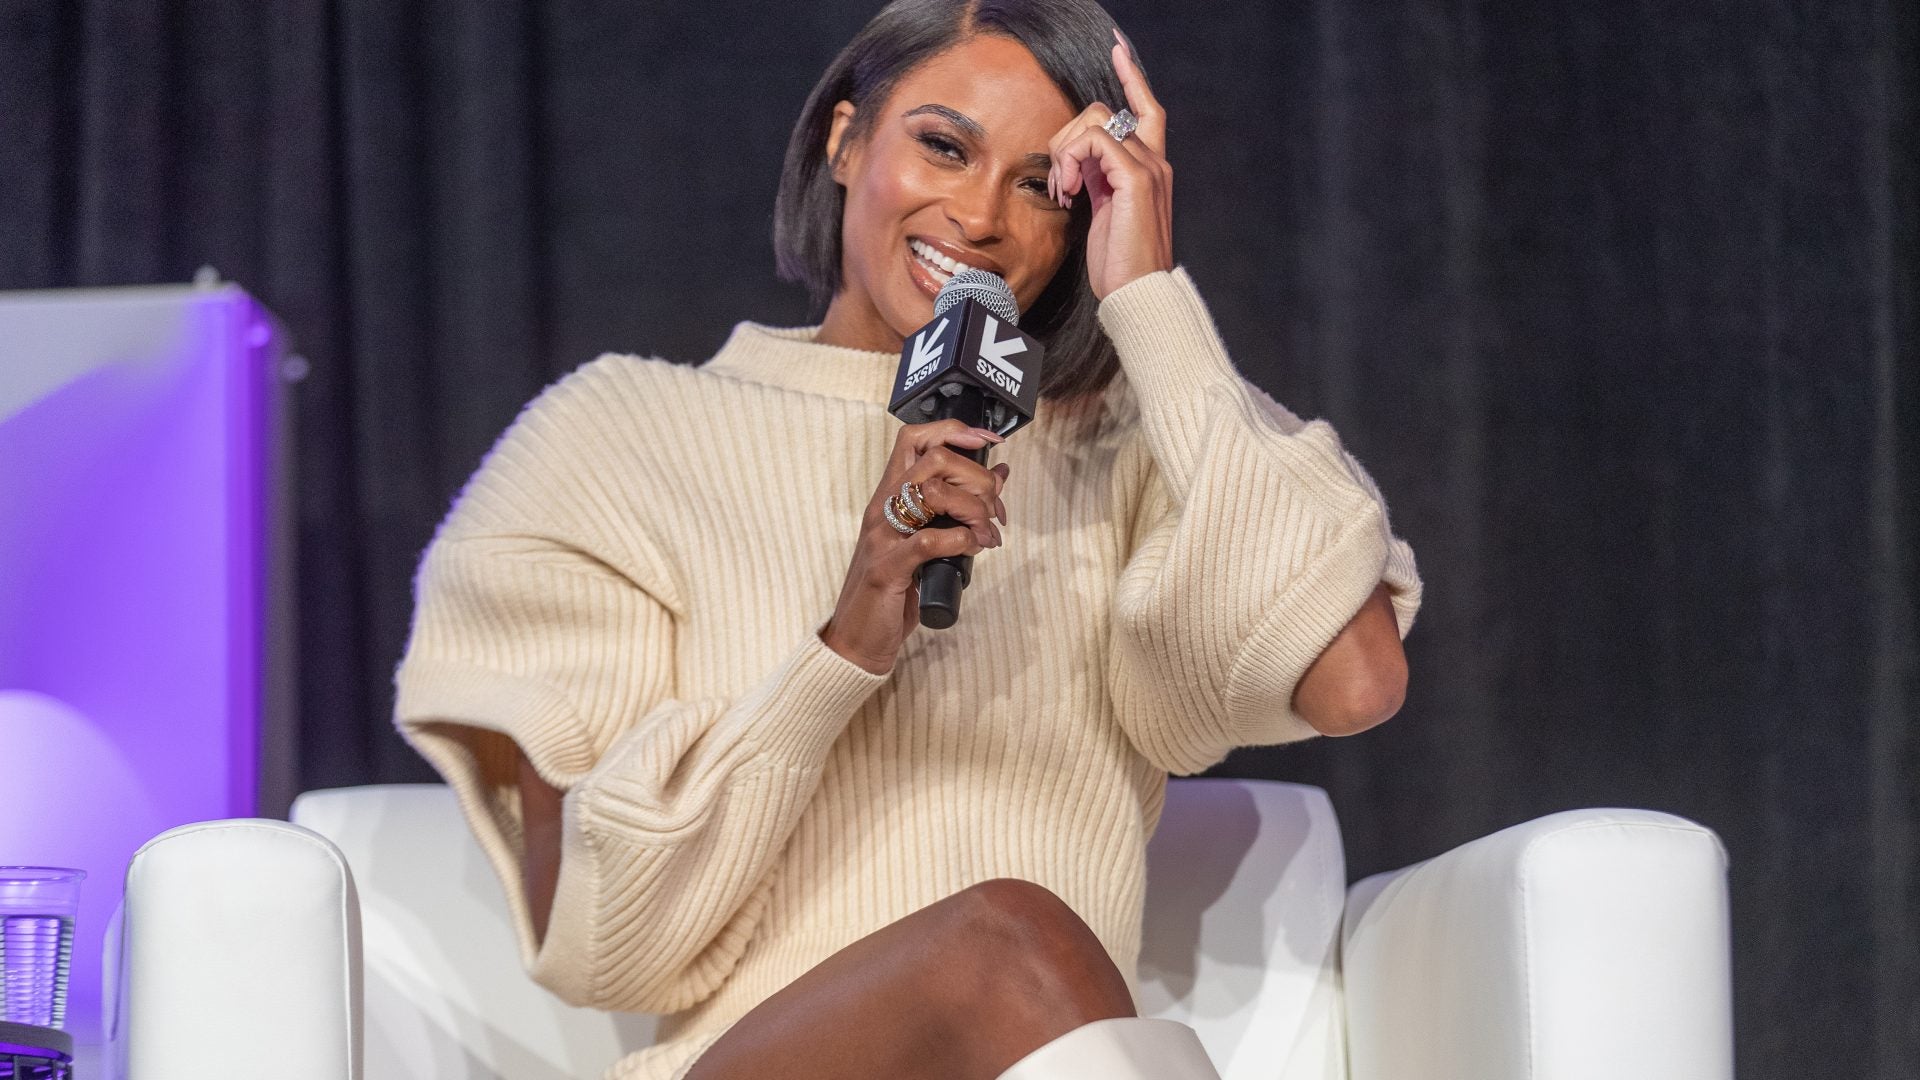 EXCLUSIVE: Ciara Responds To Backlash Over Her "Independent" Lyrics And Head-Turning Oscars Dress At SXSW